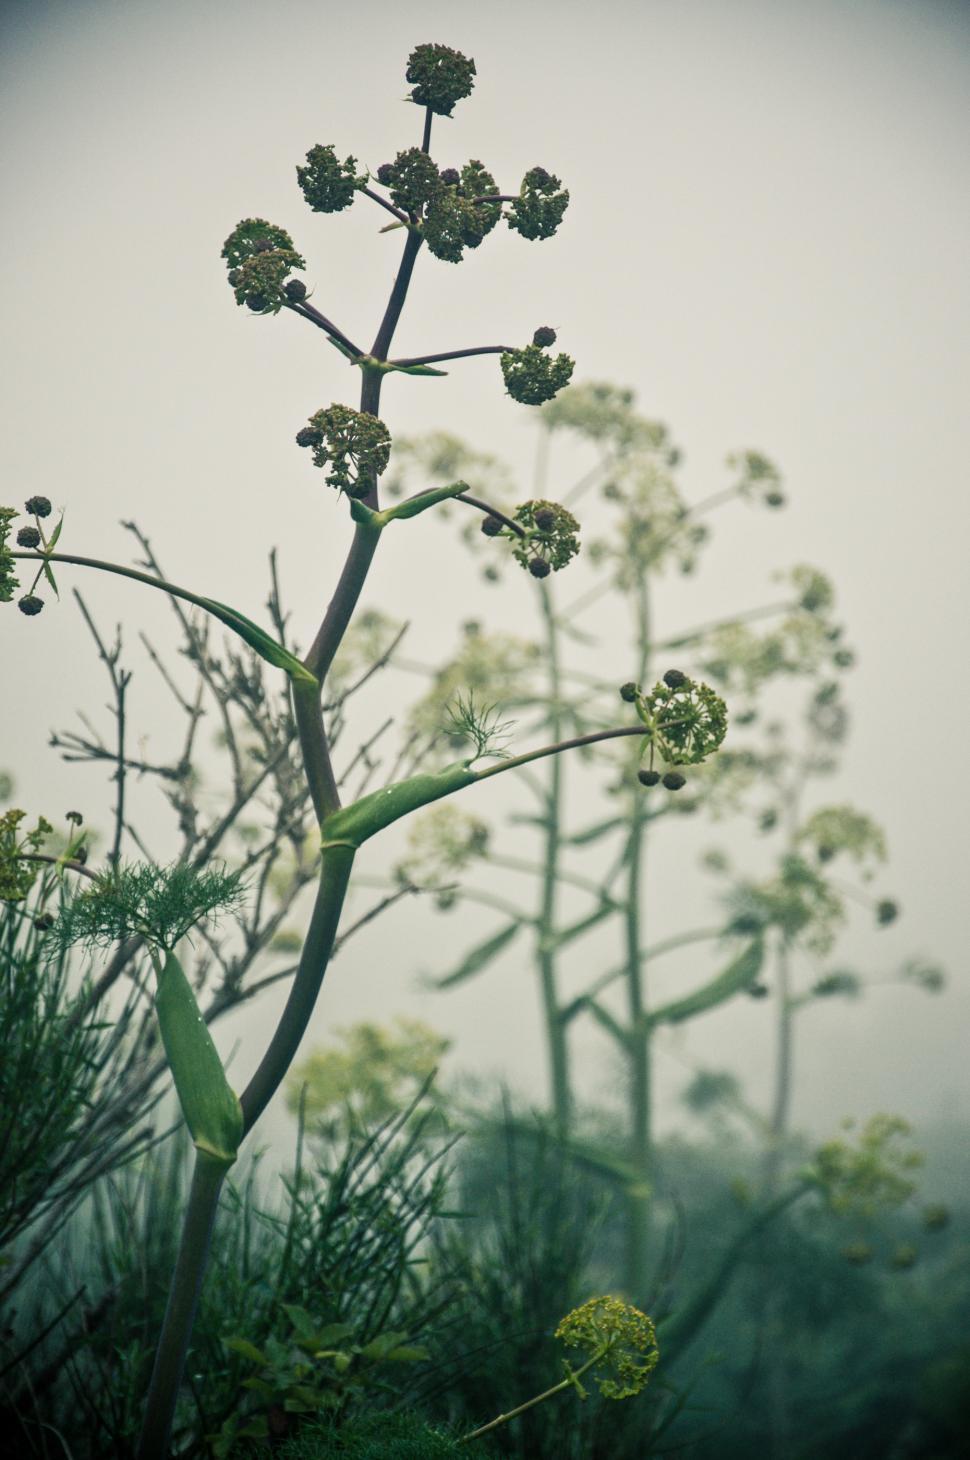 Free Image of Plants in the mist 